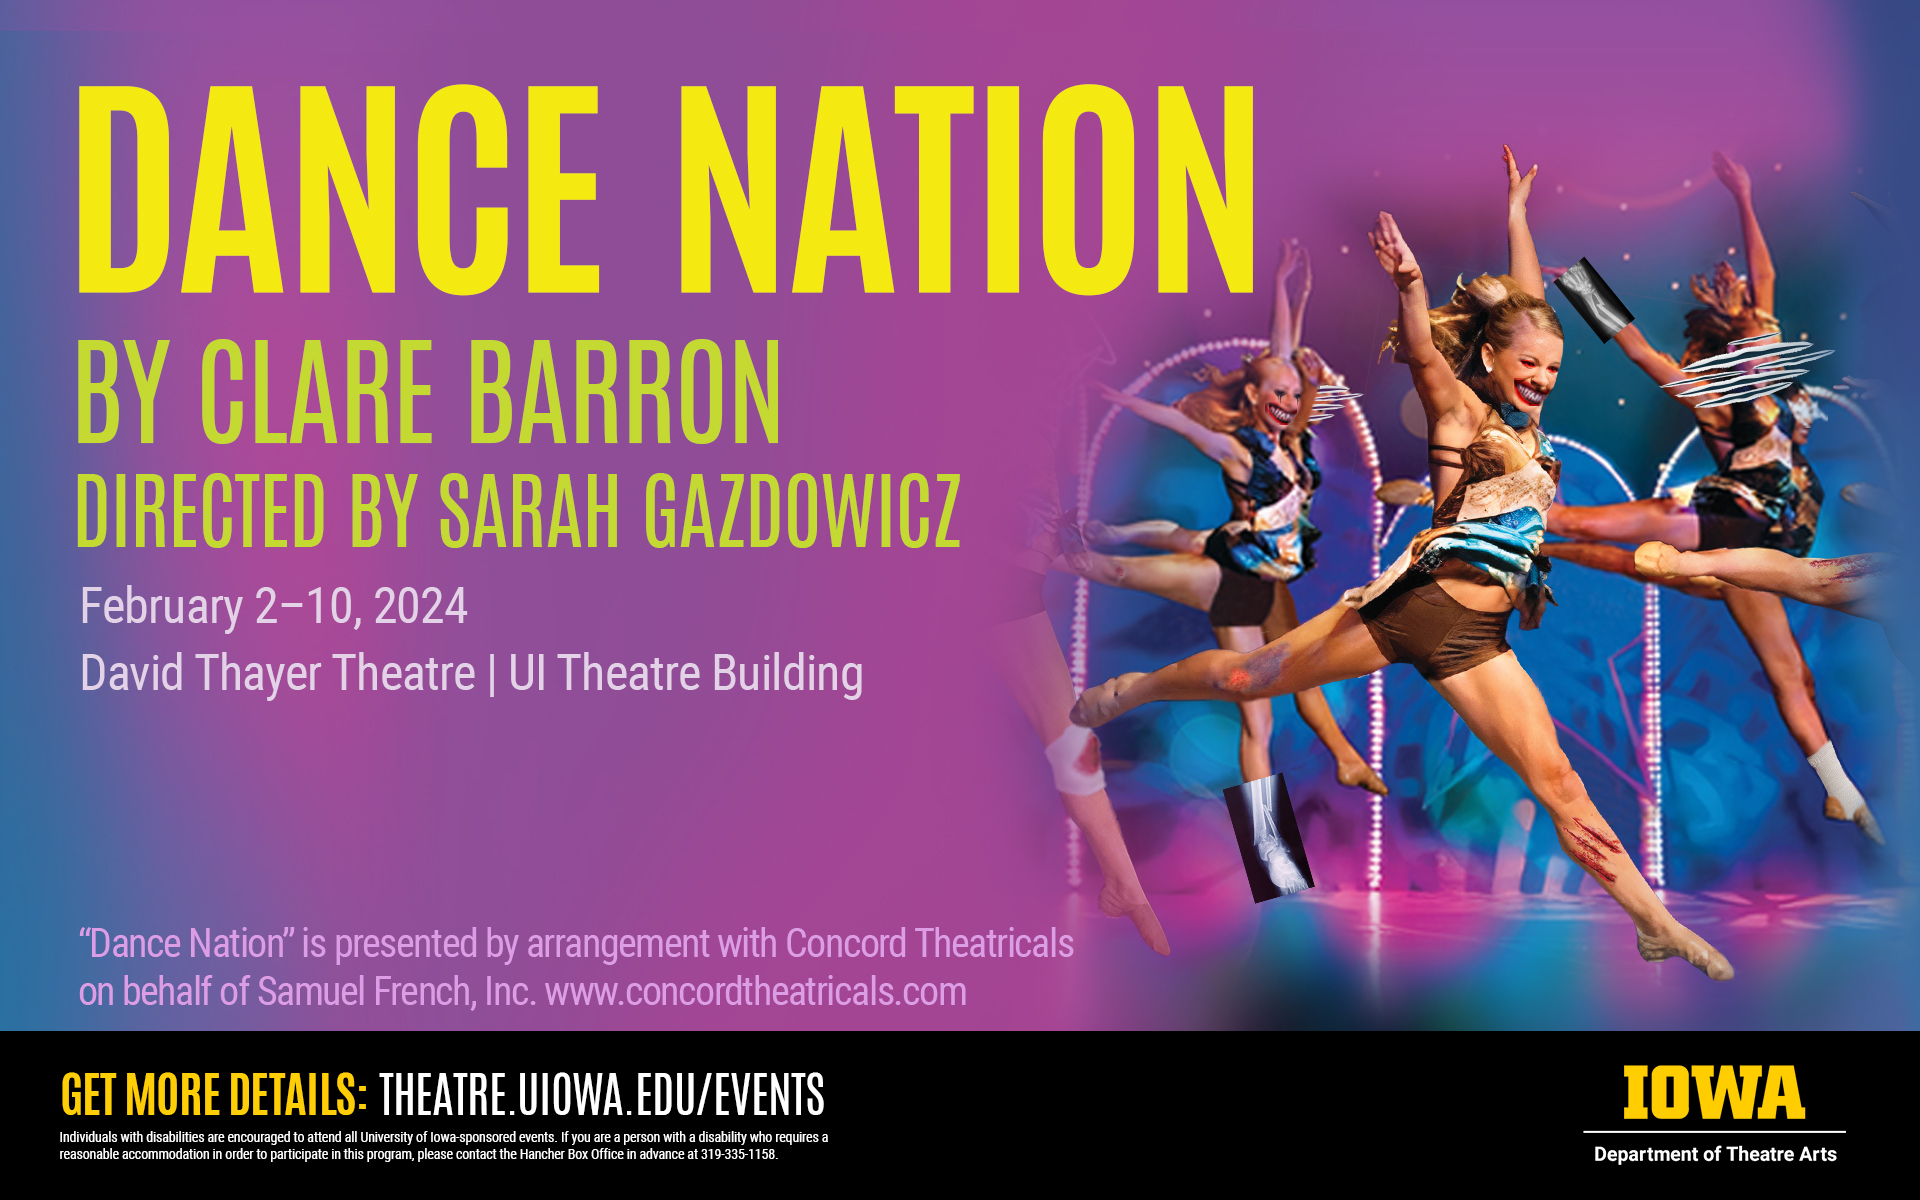 Dance Nation by Clare Barron directed by Sarah Gazdowicz